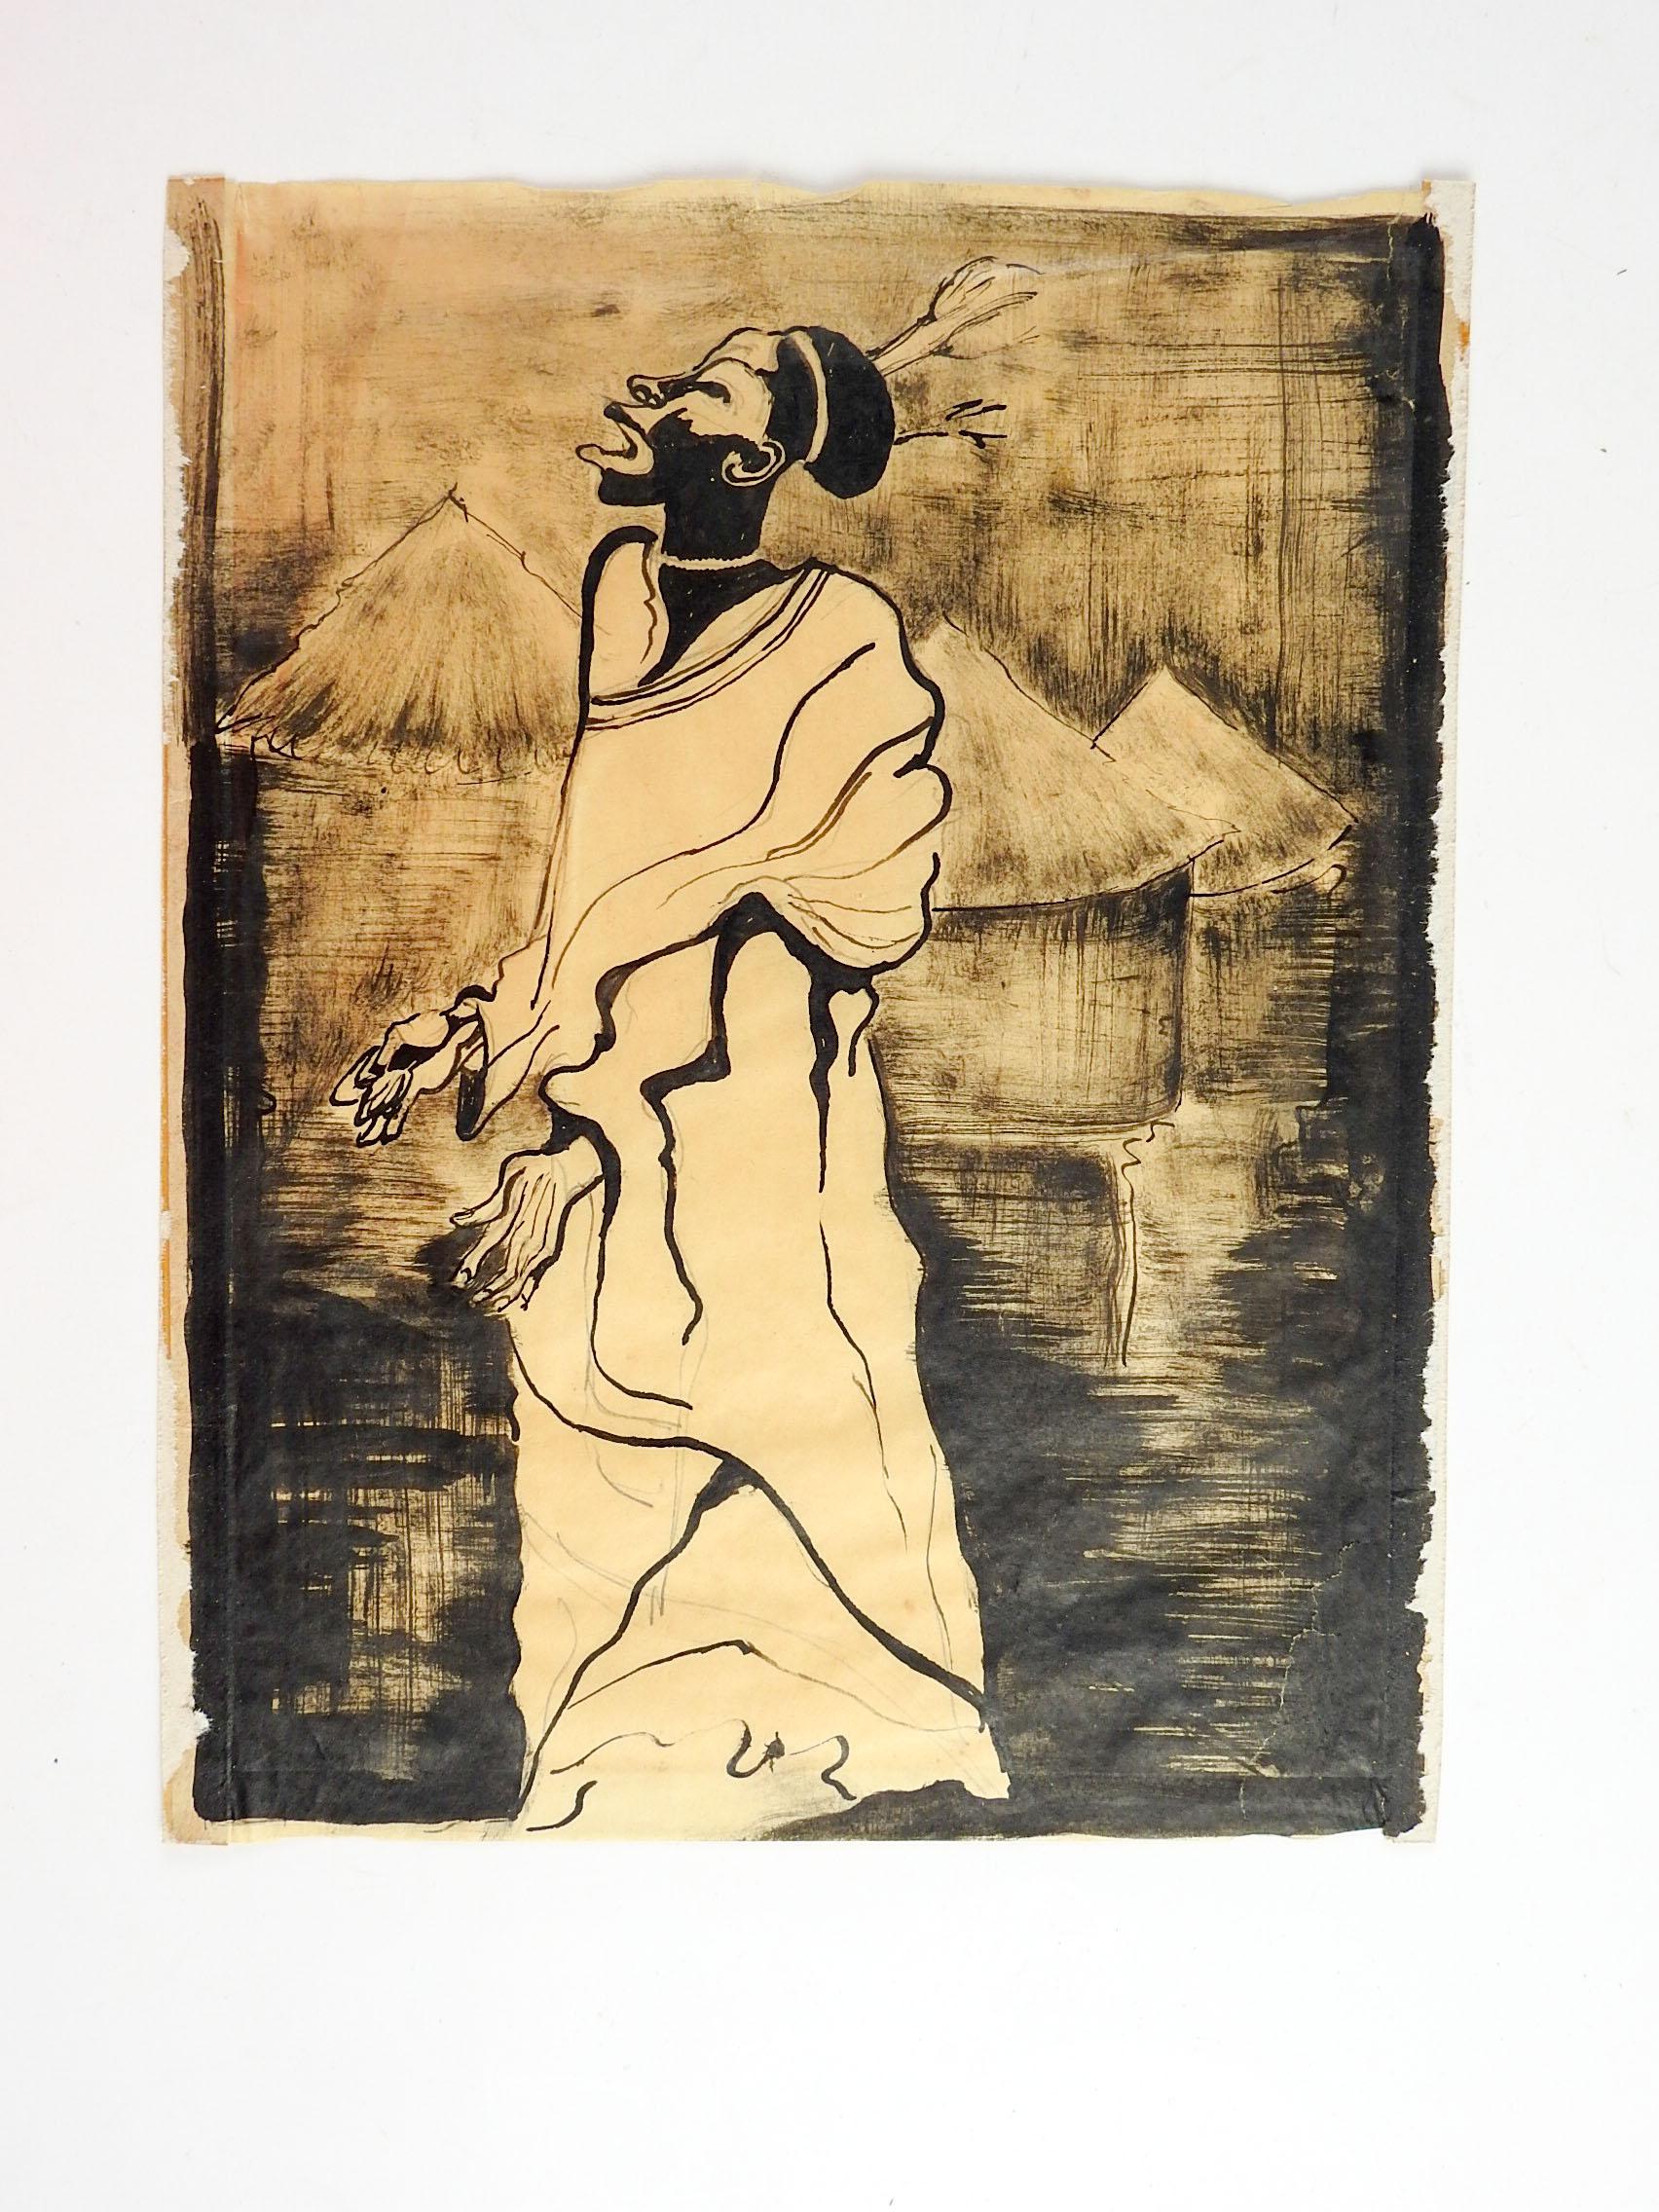 Circa 1930's powerful ink wash on thin paper study of African man. Unsigned, probably executed by an African American artist, based on the other works from the estate. Age toning, tape residue along edges, some cockling to paper.